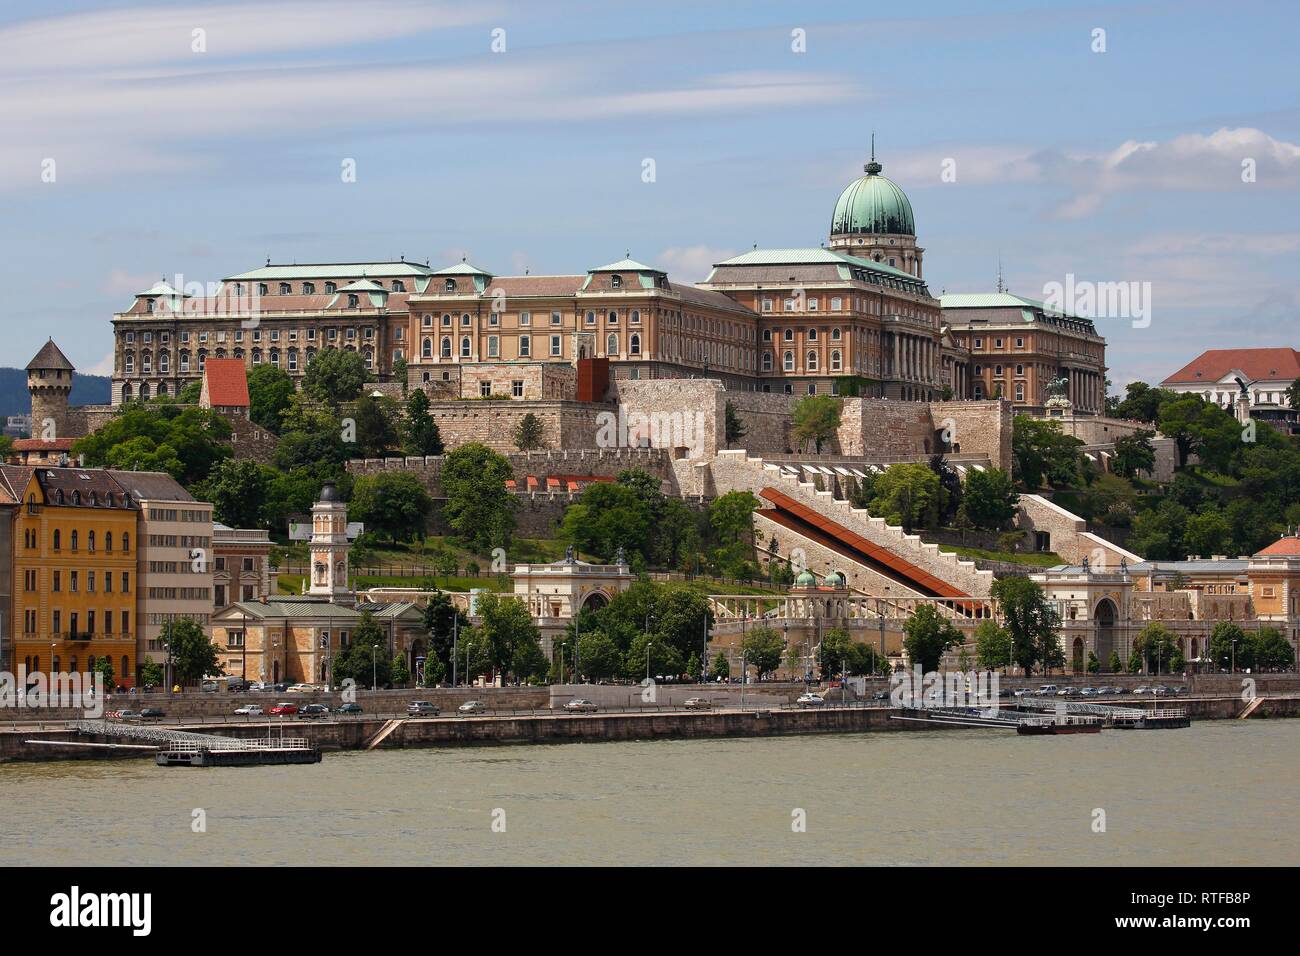 Castle palace at the Danube seen from the Pest district, Castle quarter, Budapest, Hungary Stock Photo